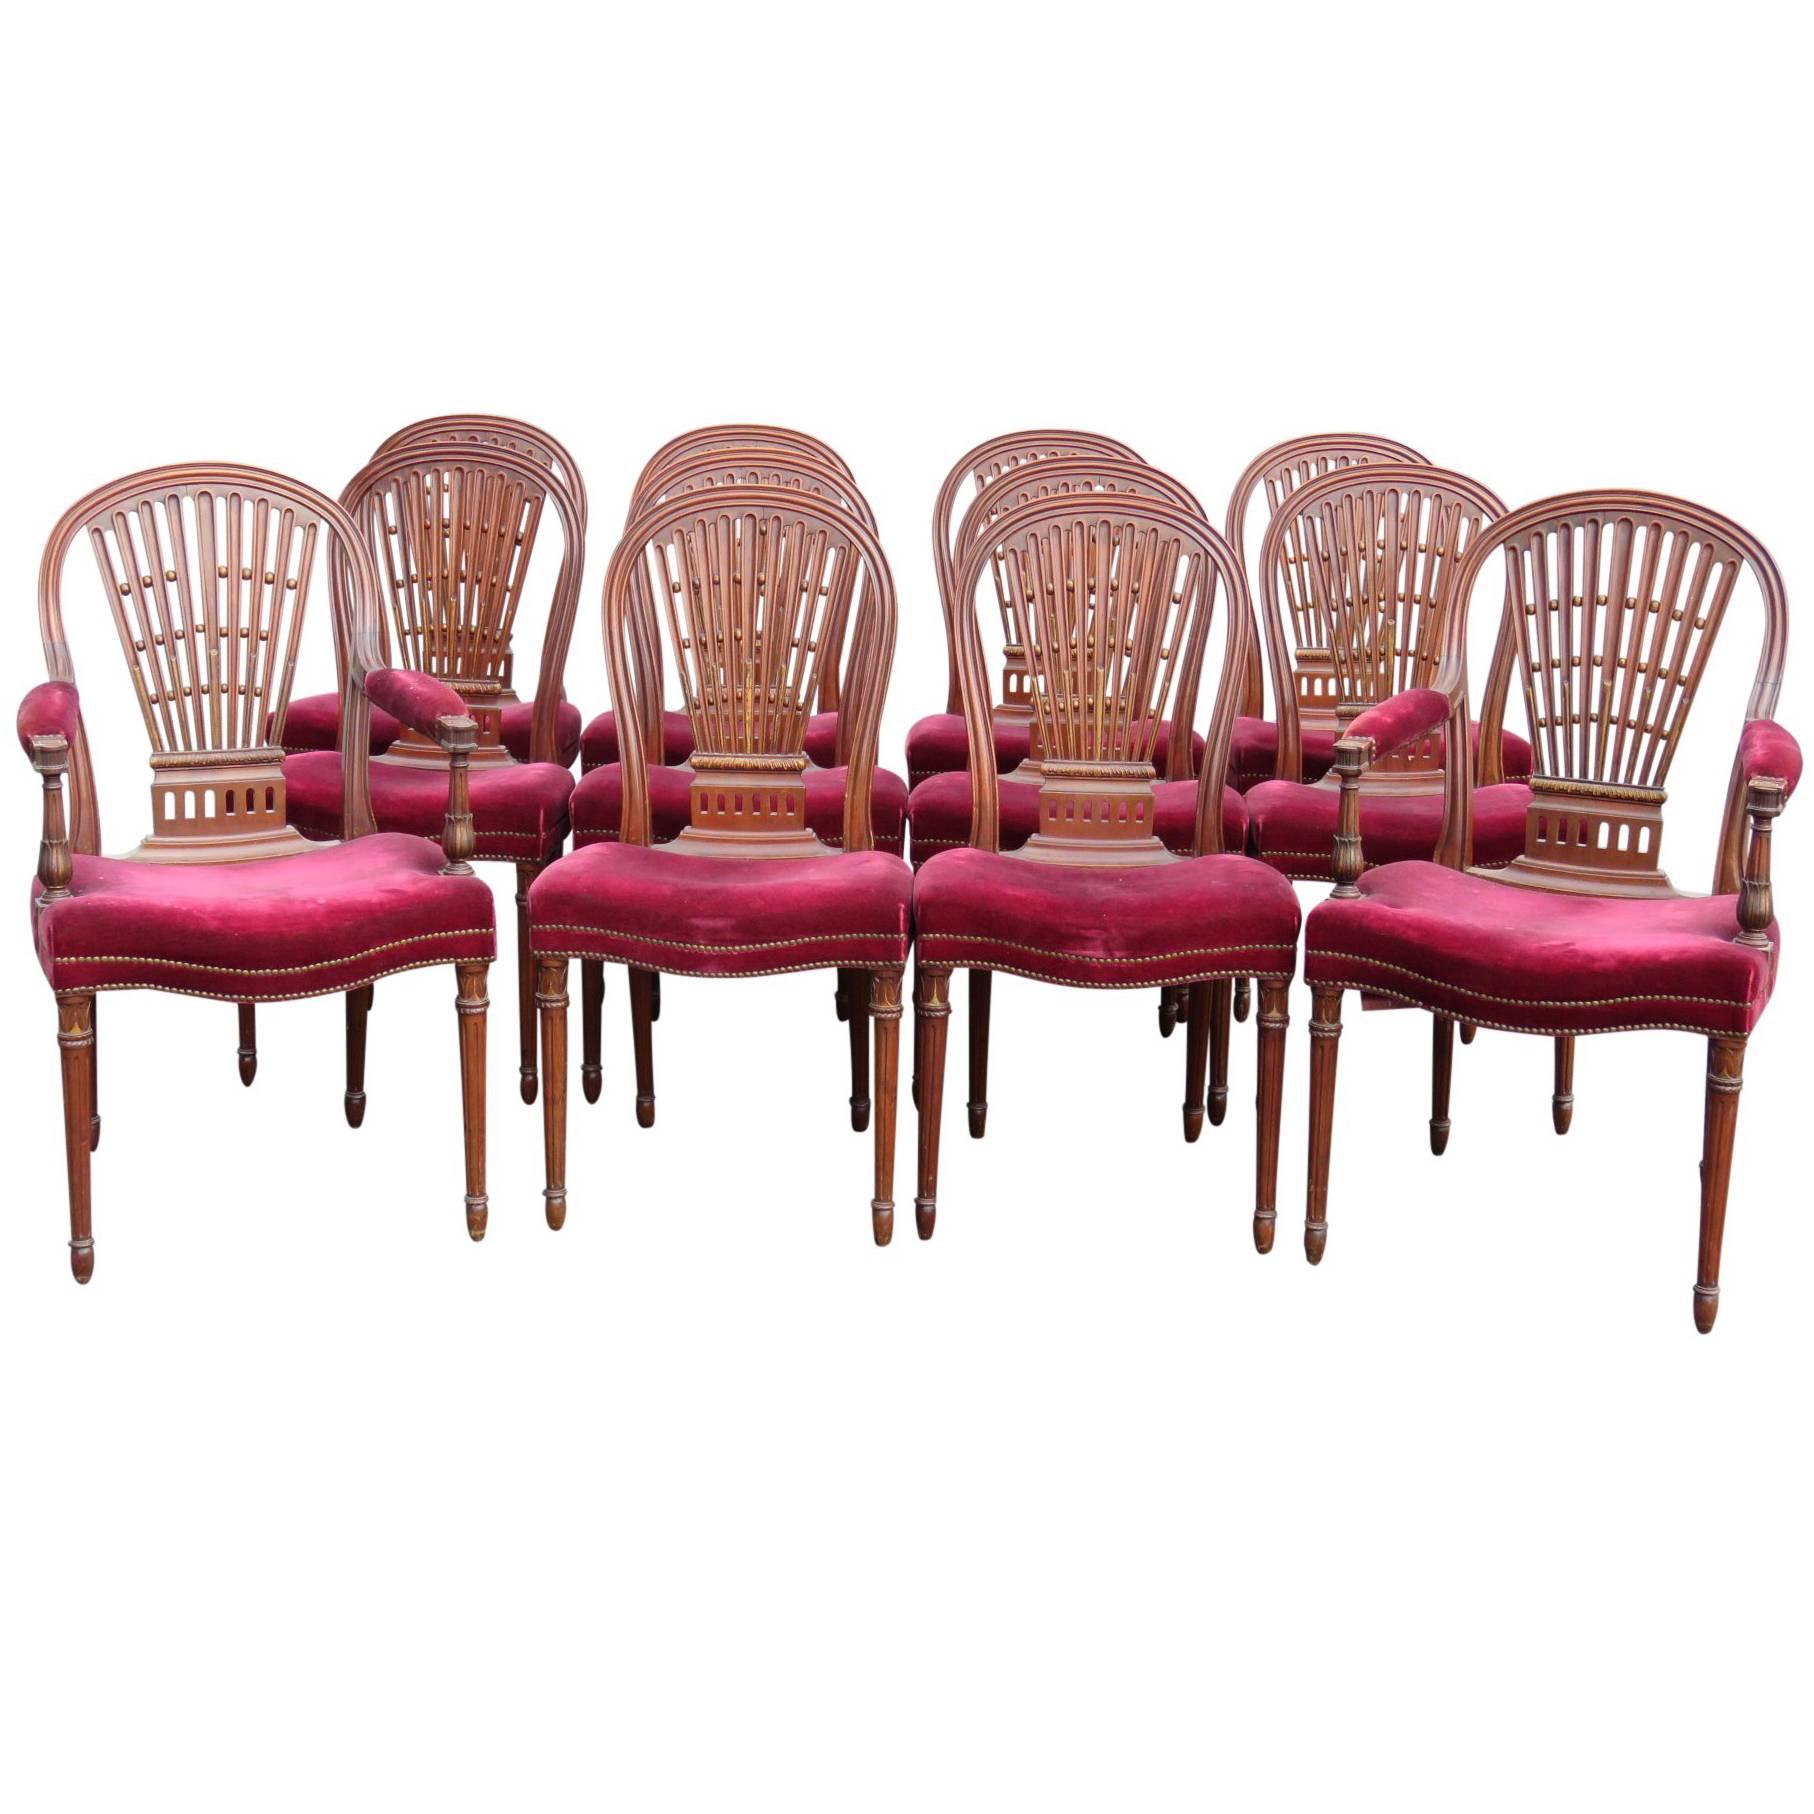 12 Jansen Directoire Style Carved Walnut Dining Chairs